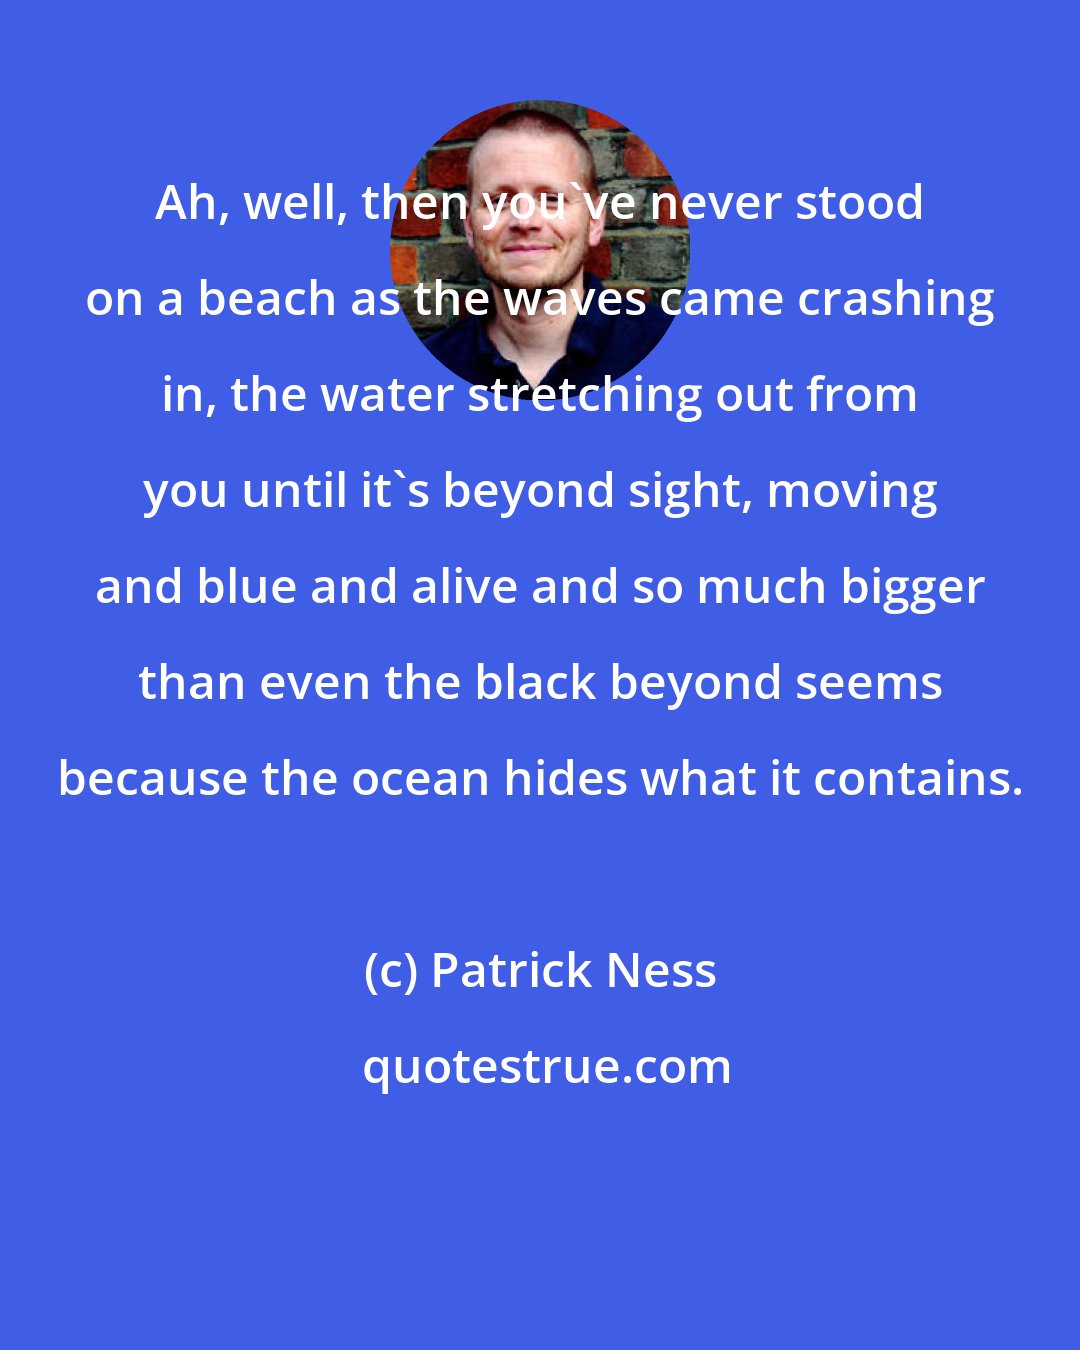 Patrick Ness: Ah, well, then you've never stood on a beach as the waves came crashing in, the water stretching out from you until it's beyond sight, moving and blue and alive and so much bigger than even the black beyond seems because the ocean hides what it contains.